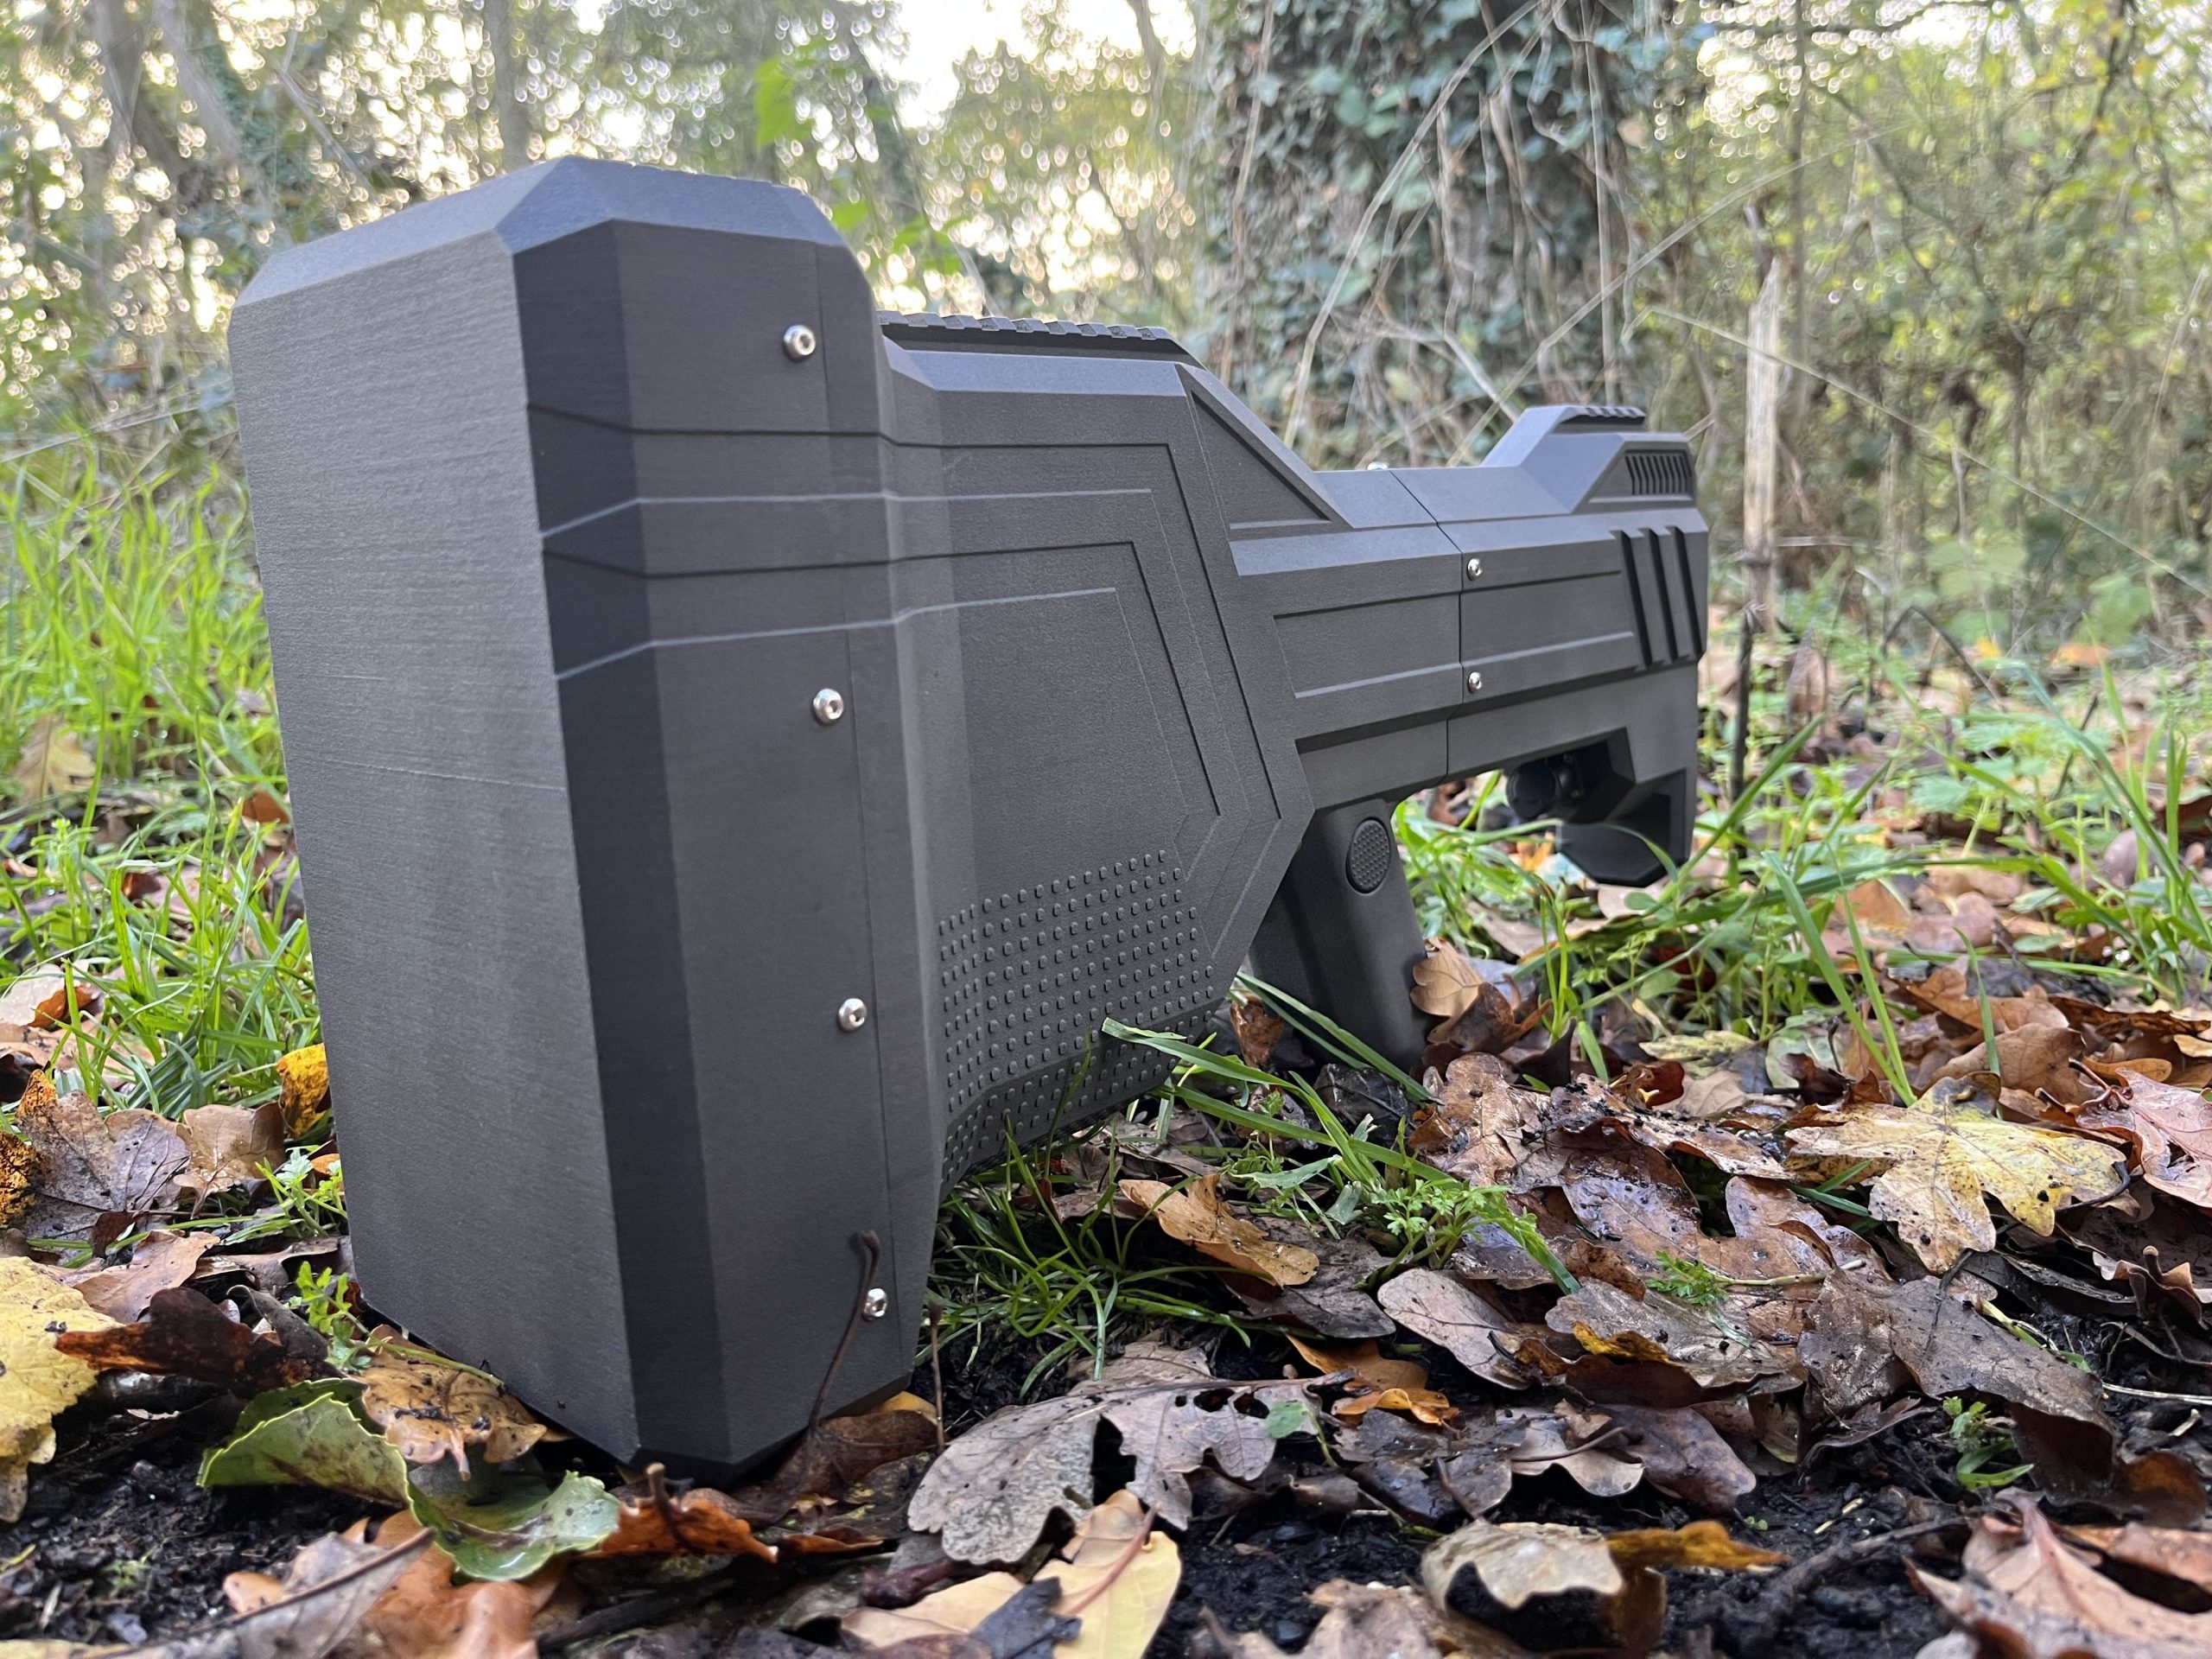 INTERVIEW] London Defense R&D launches first 3D printed drone defense system - 3D Printing